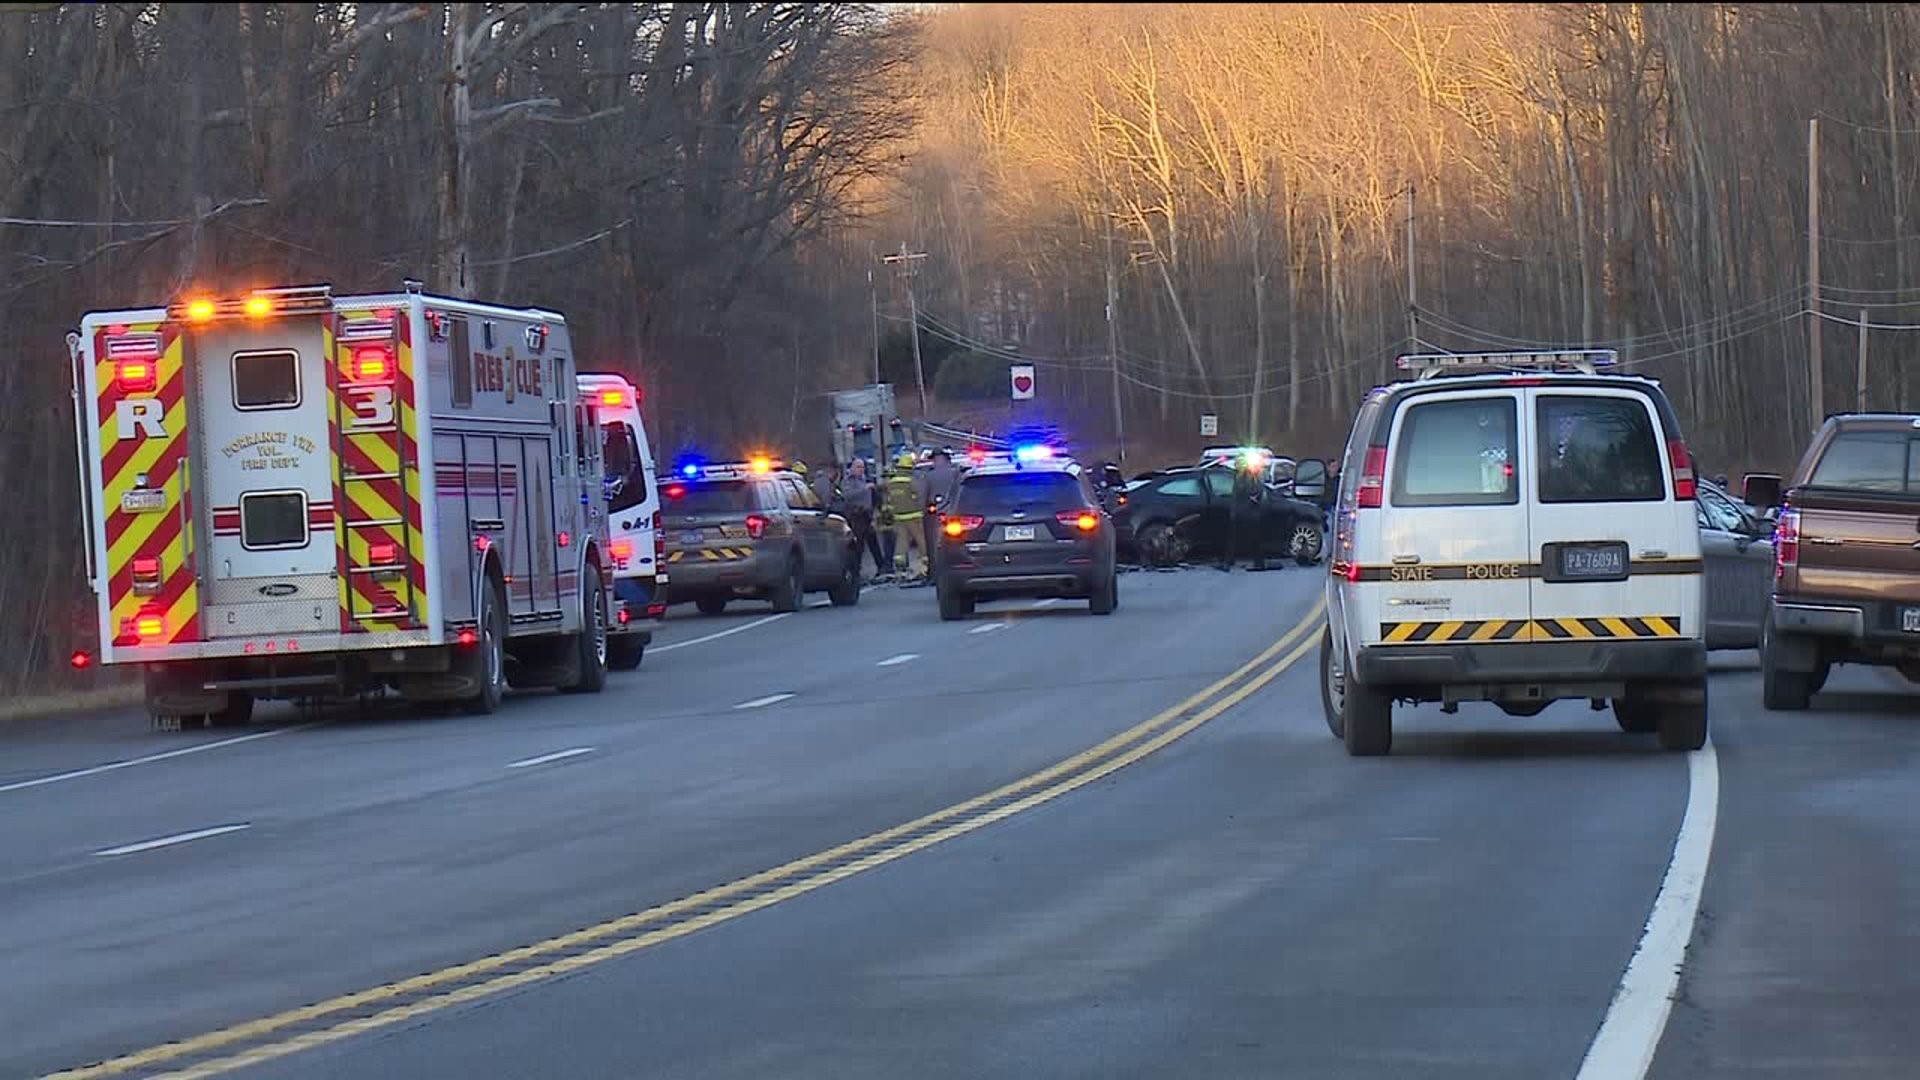 UPDATE State Police Confirm Two Killed in Crash on Route 309